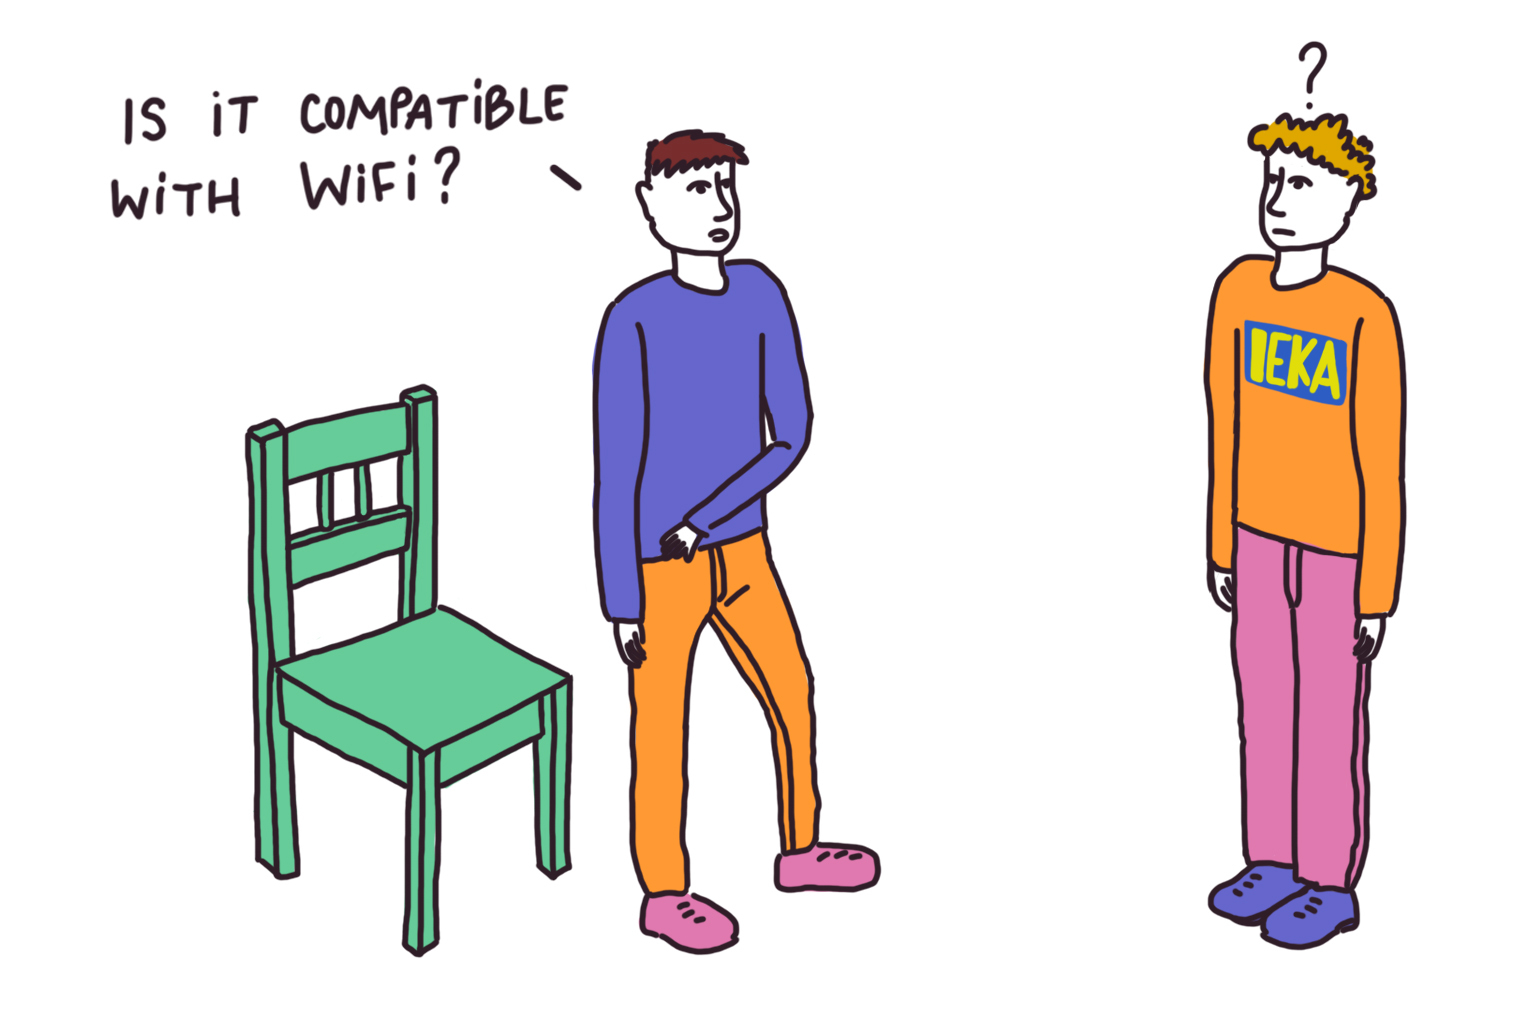 wifi devices